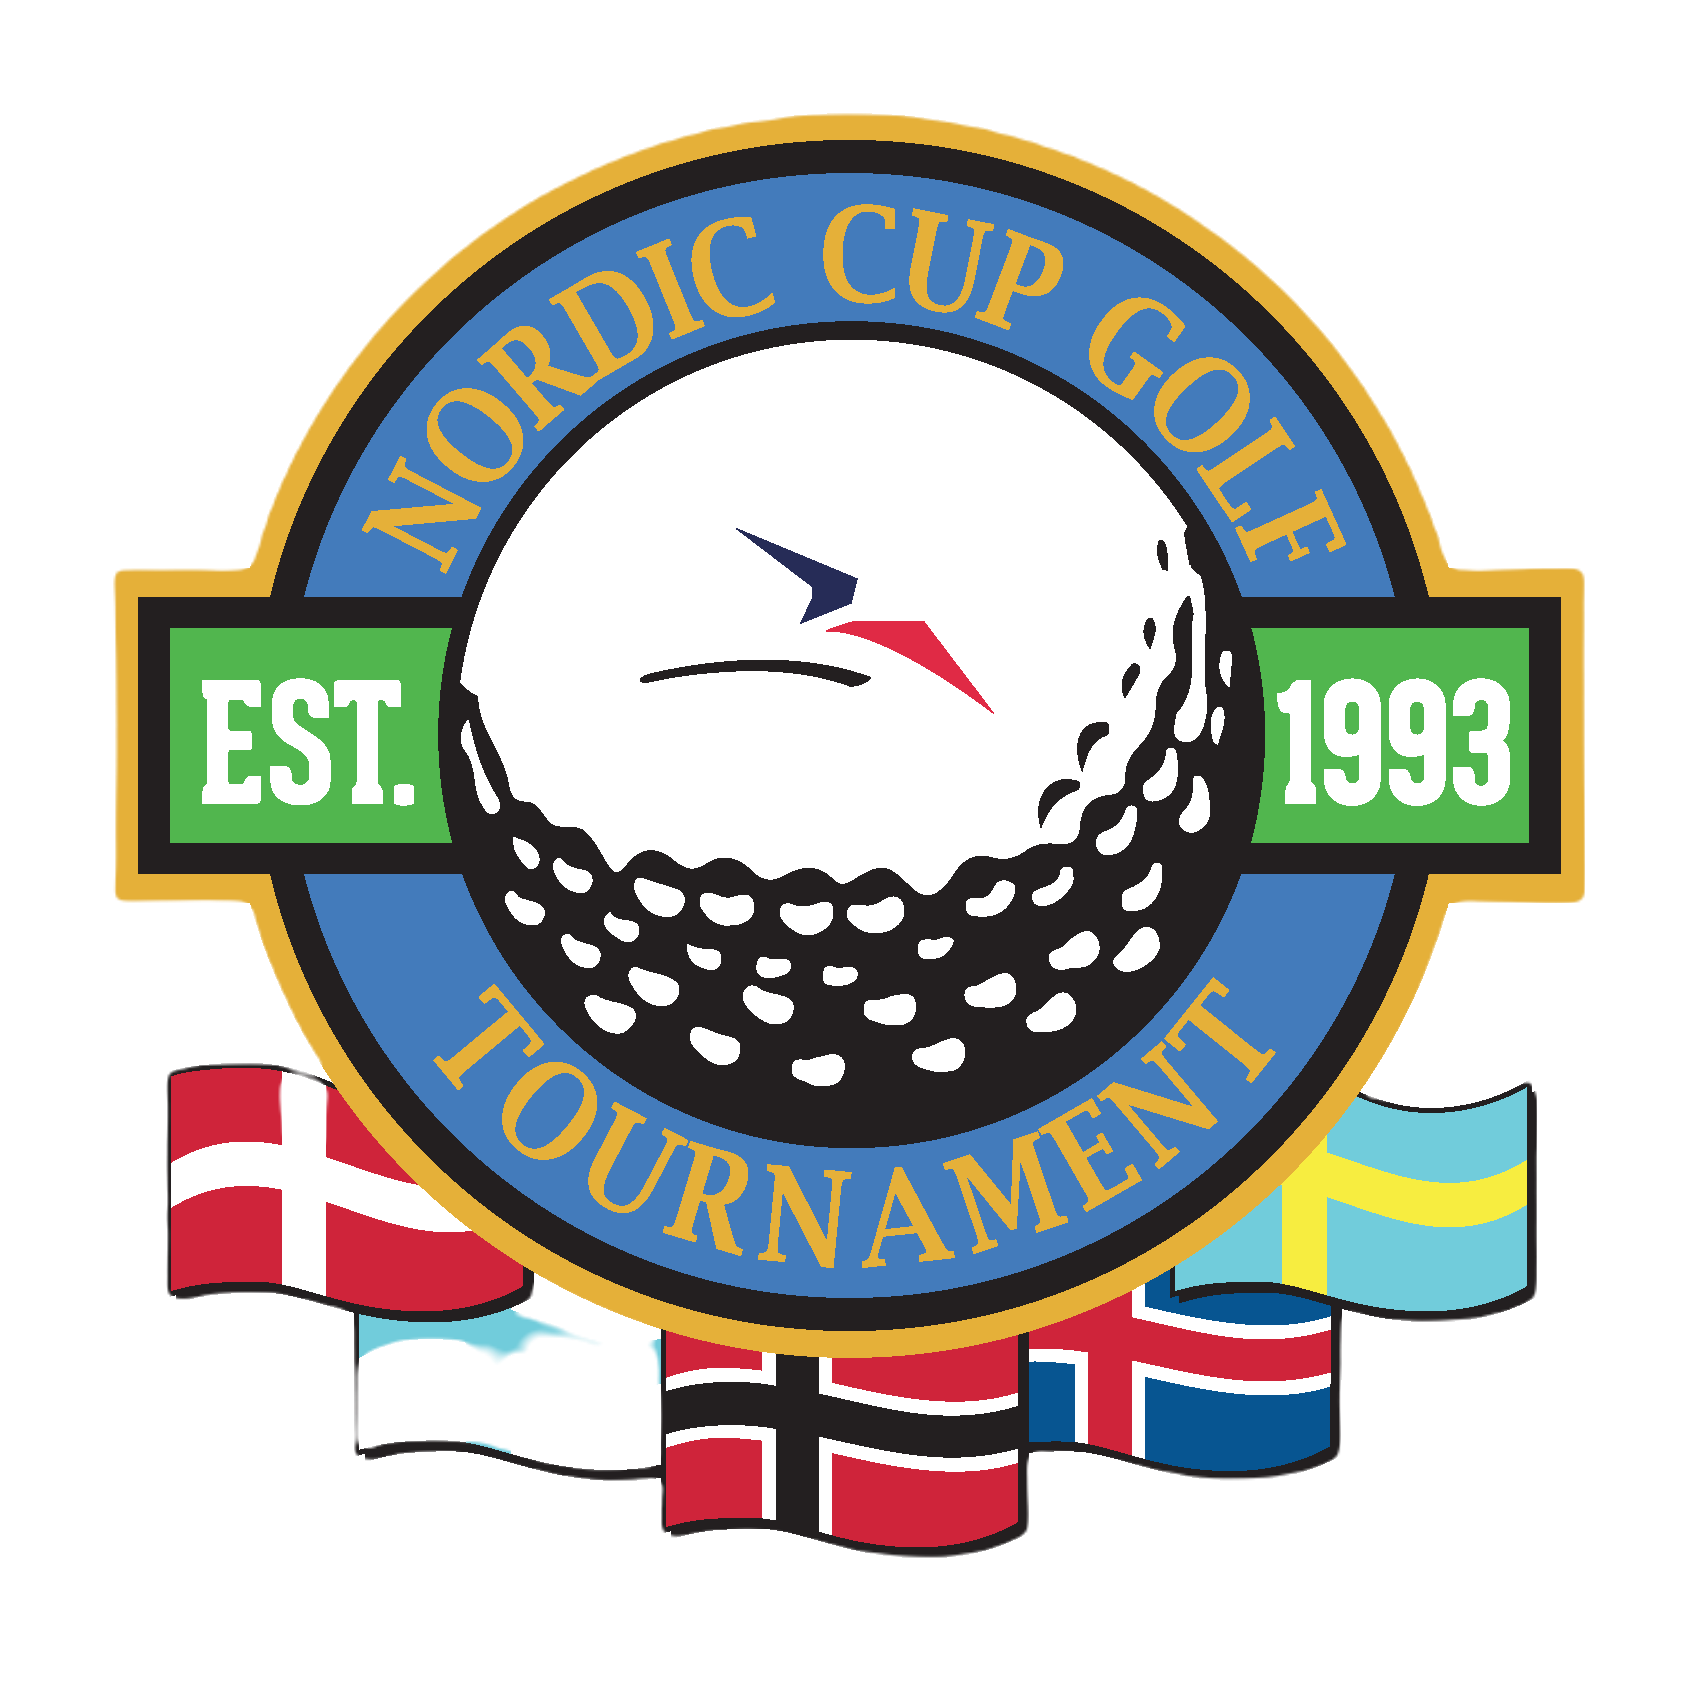 Nordic Cup Charity Golf Tournament